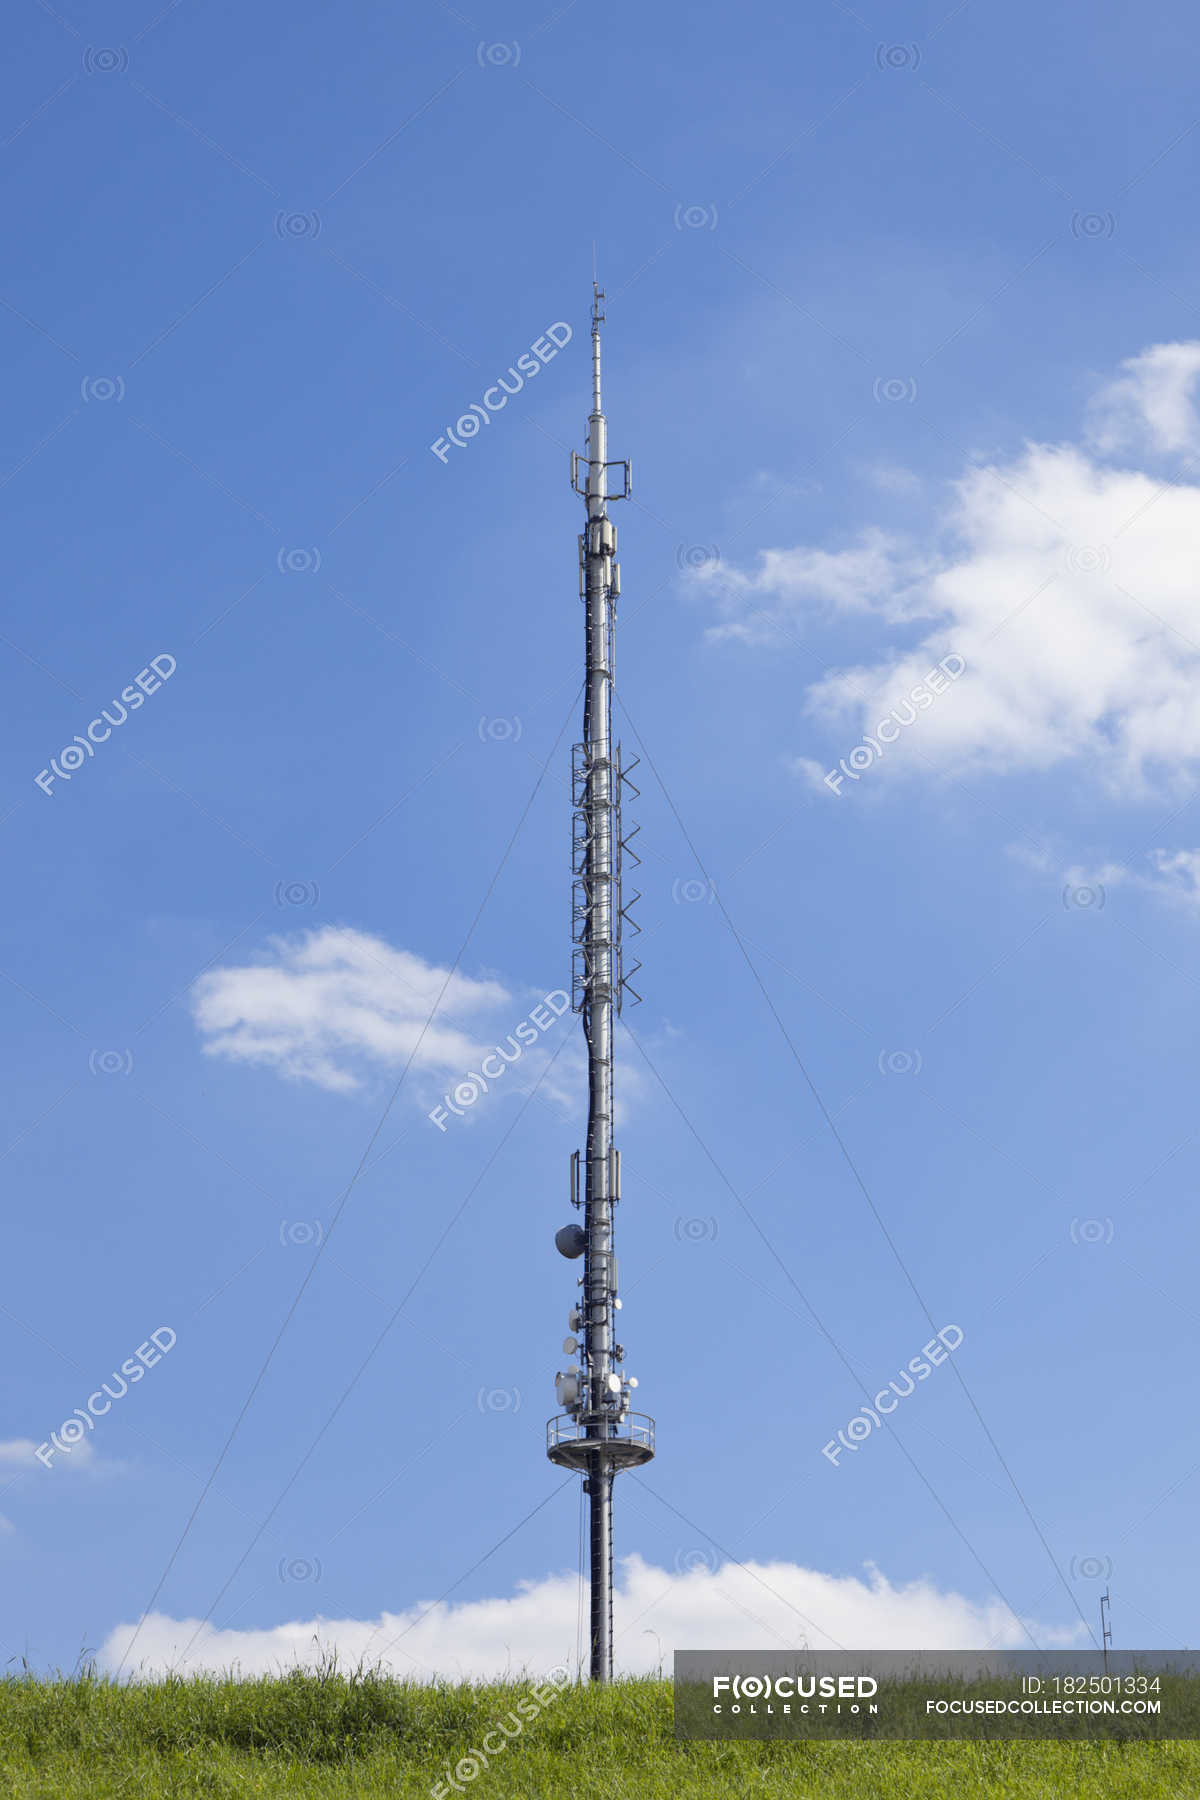 Germany, radio and television antenna and blue sky with clouds on  background — communication technology, daytime - Stock Photo | #182501334